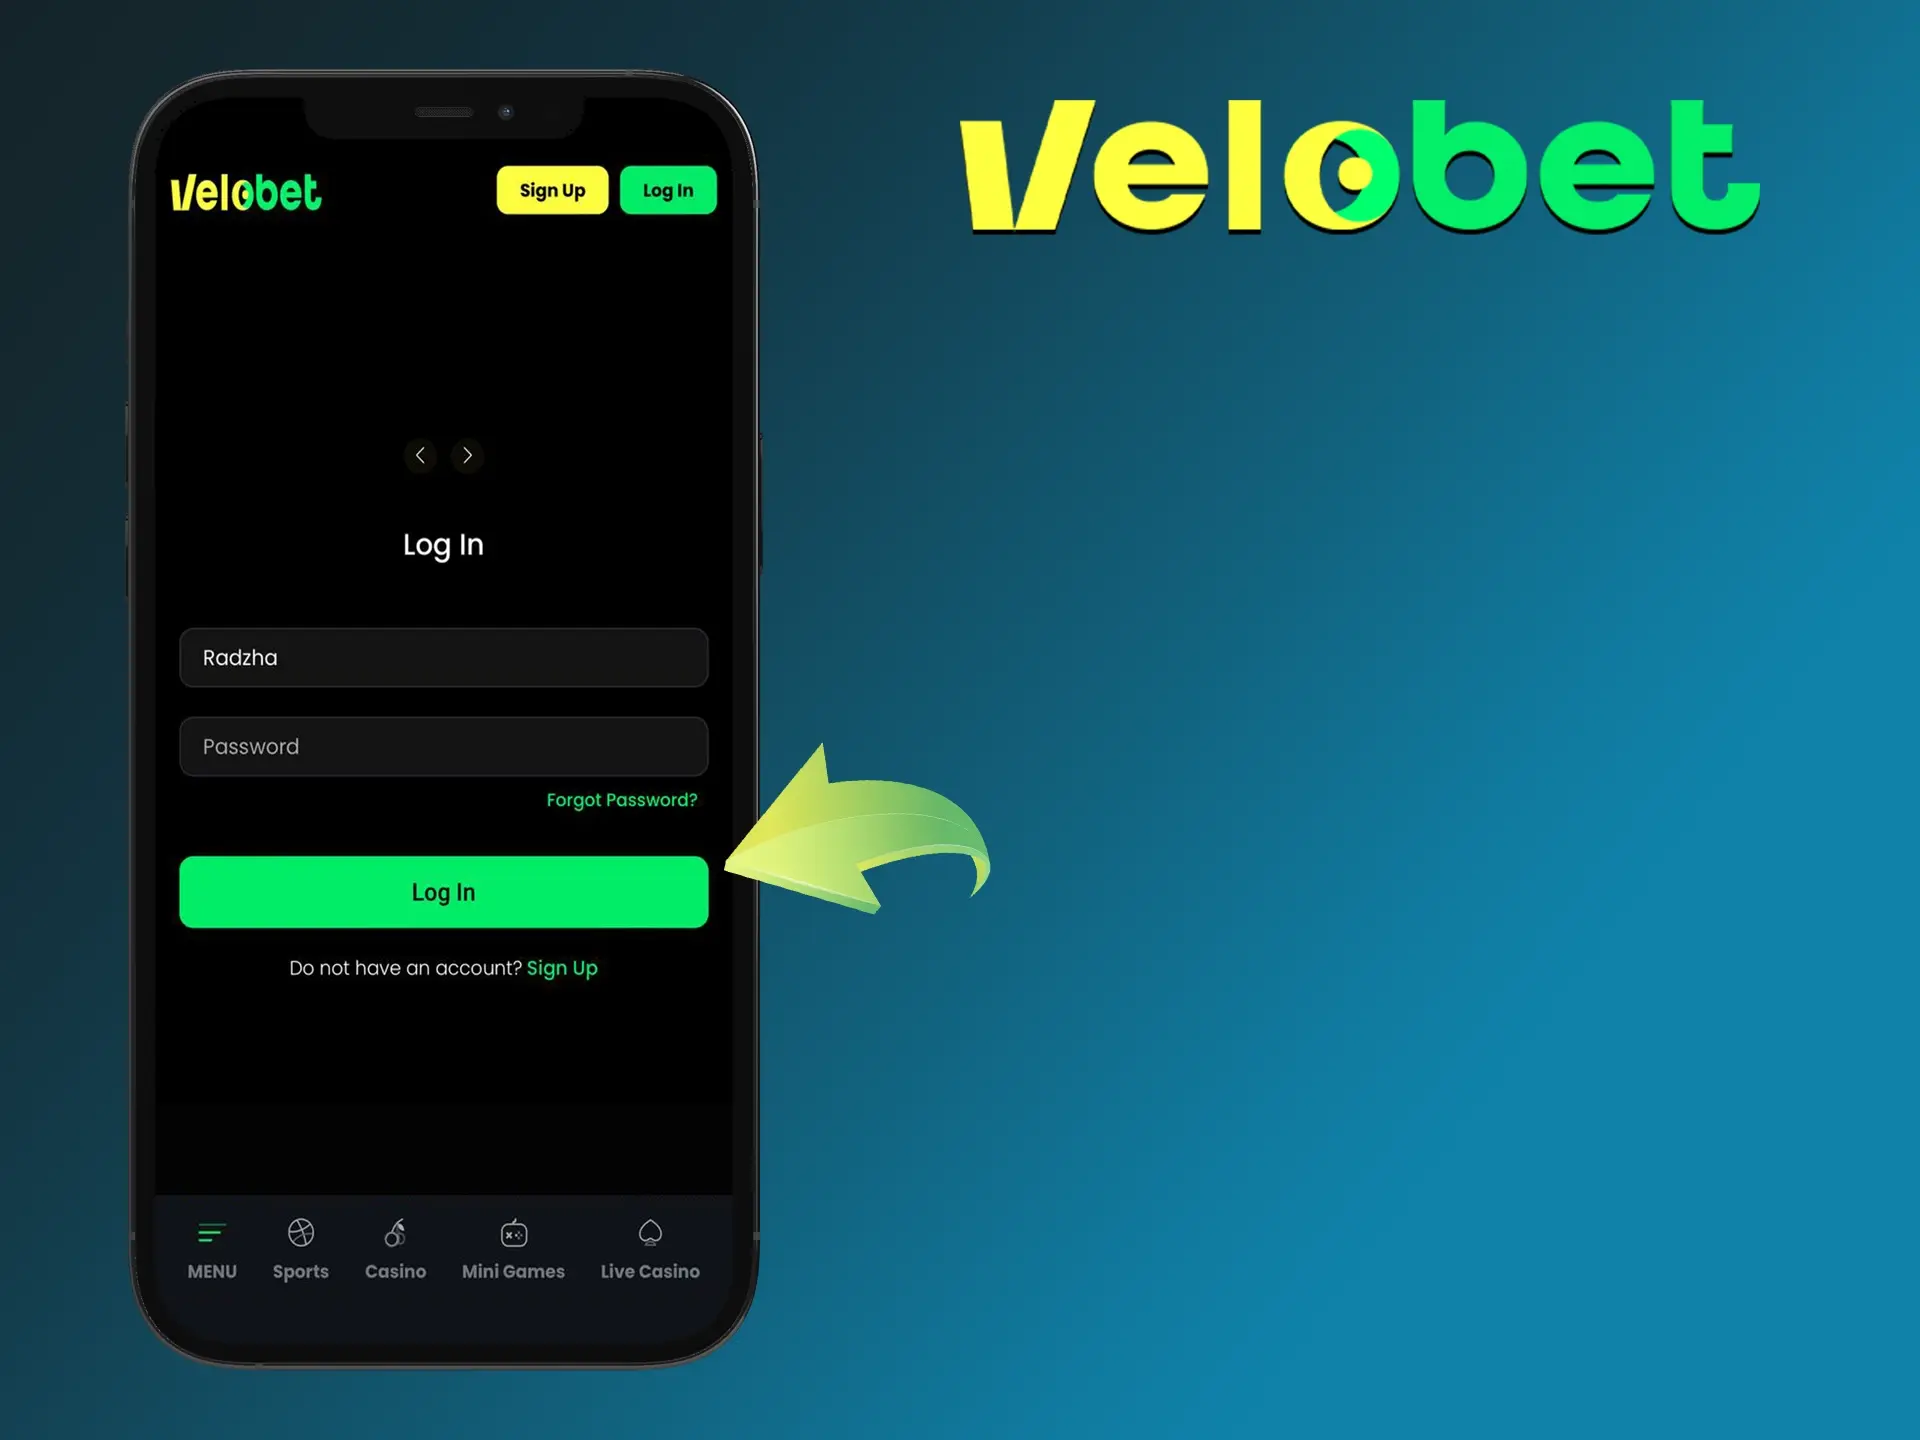 Launch the app and log in to your Velobet account to claim your bonus and place your first bet.